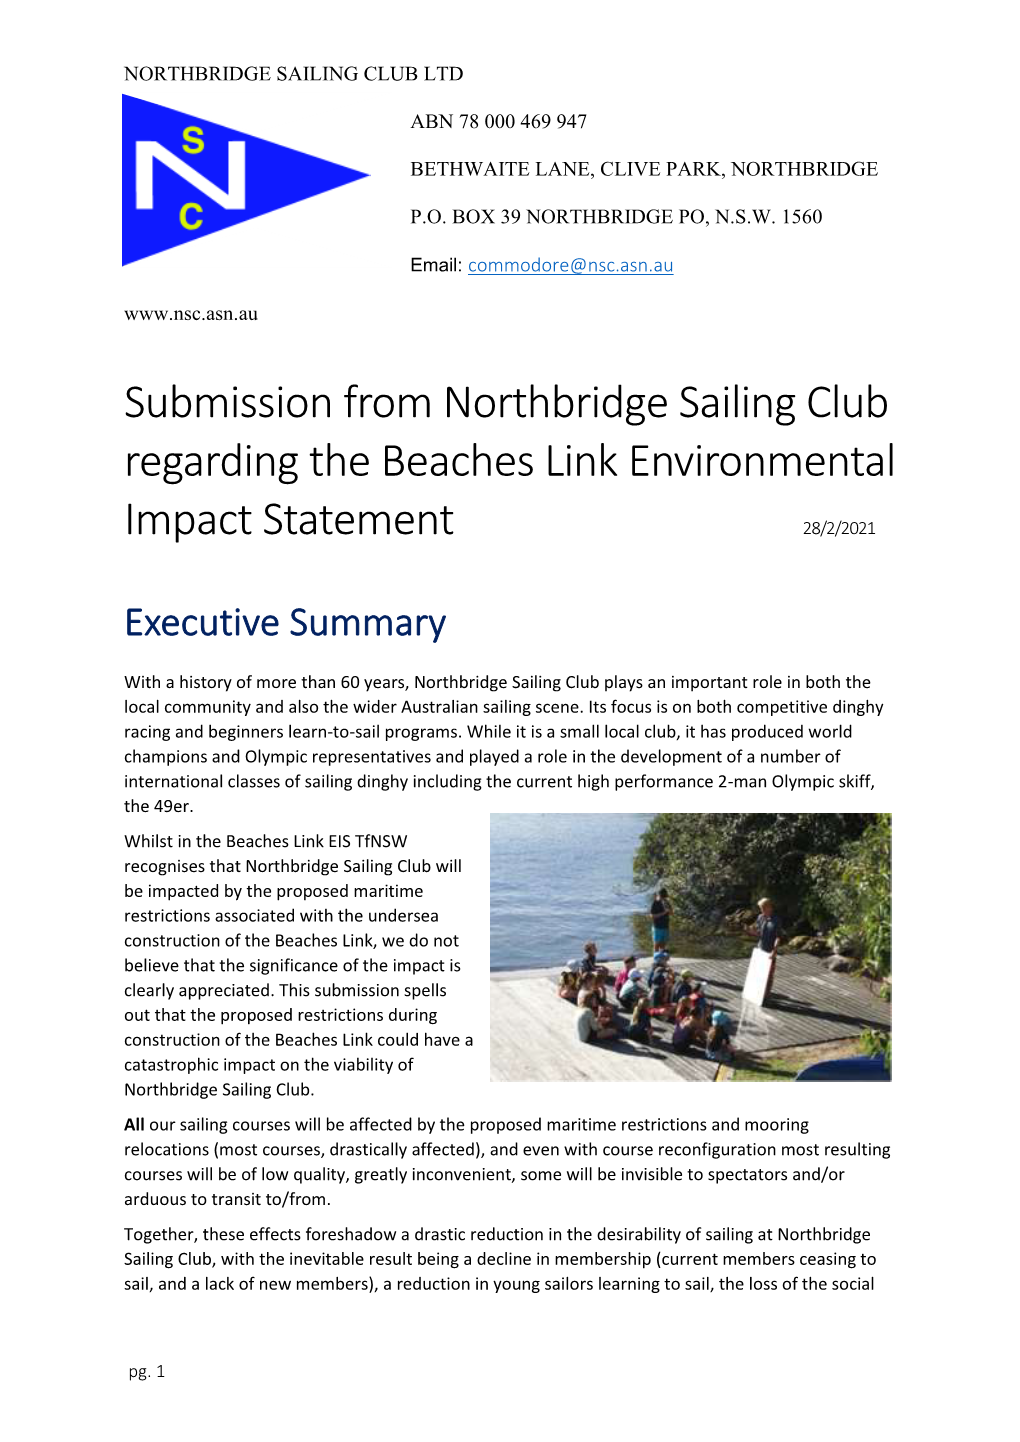 Submission from Northbridge Sailing Club Regarding the Beaches Link Environmental